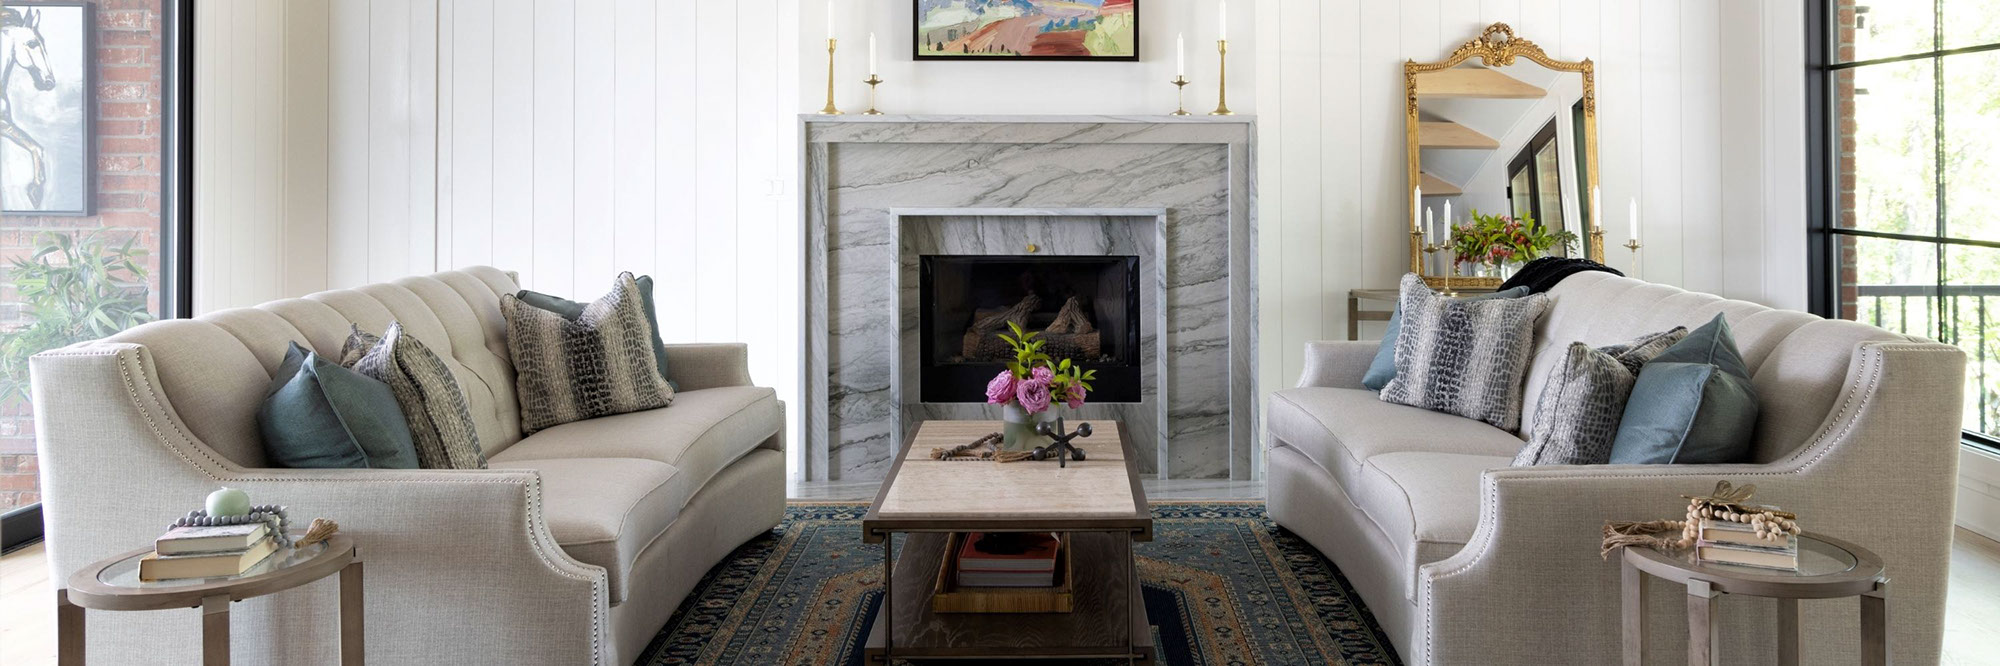 Renovated living room with white vertical shiplap walls, fireplace with gray natural quartzite mantel and hearth, two beige linen sofas with blue & gray pillows.